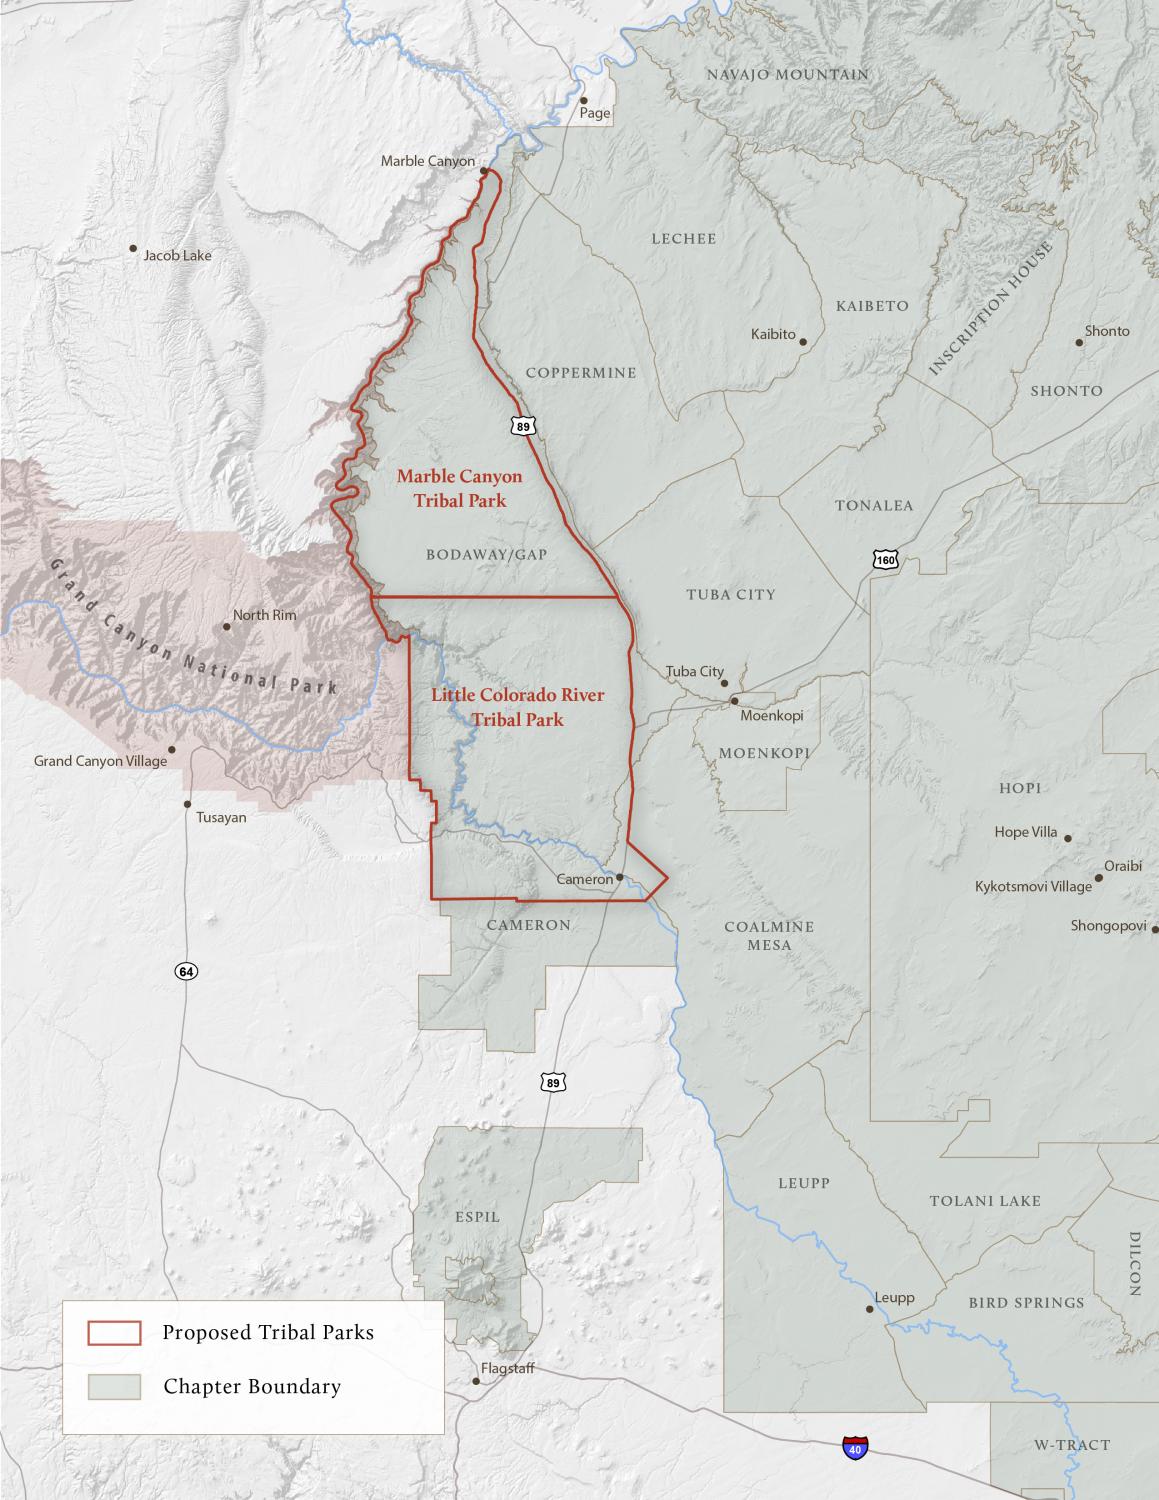 Proposed Marble Canyon and Little Colorado River Tribal Parks, Navajo Nation